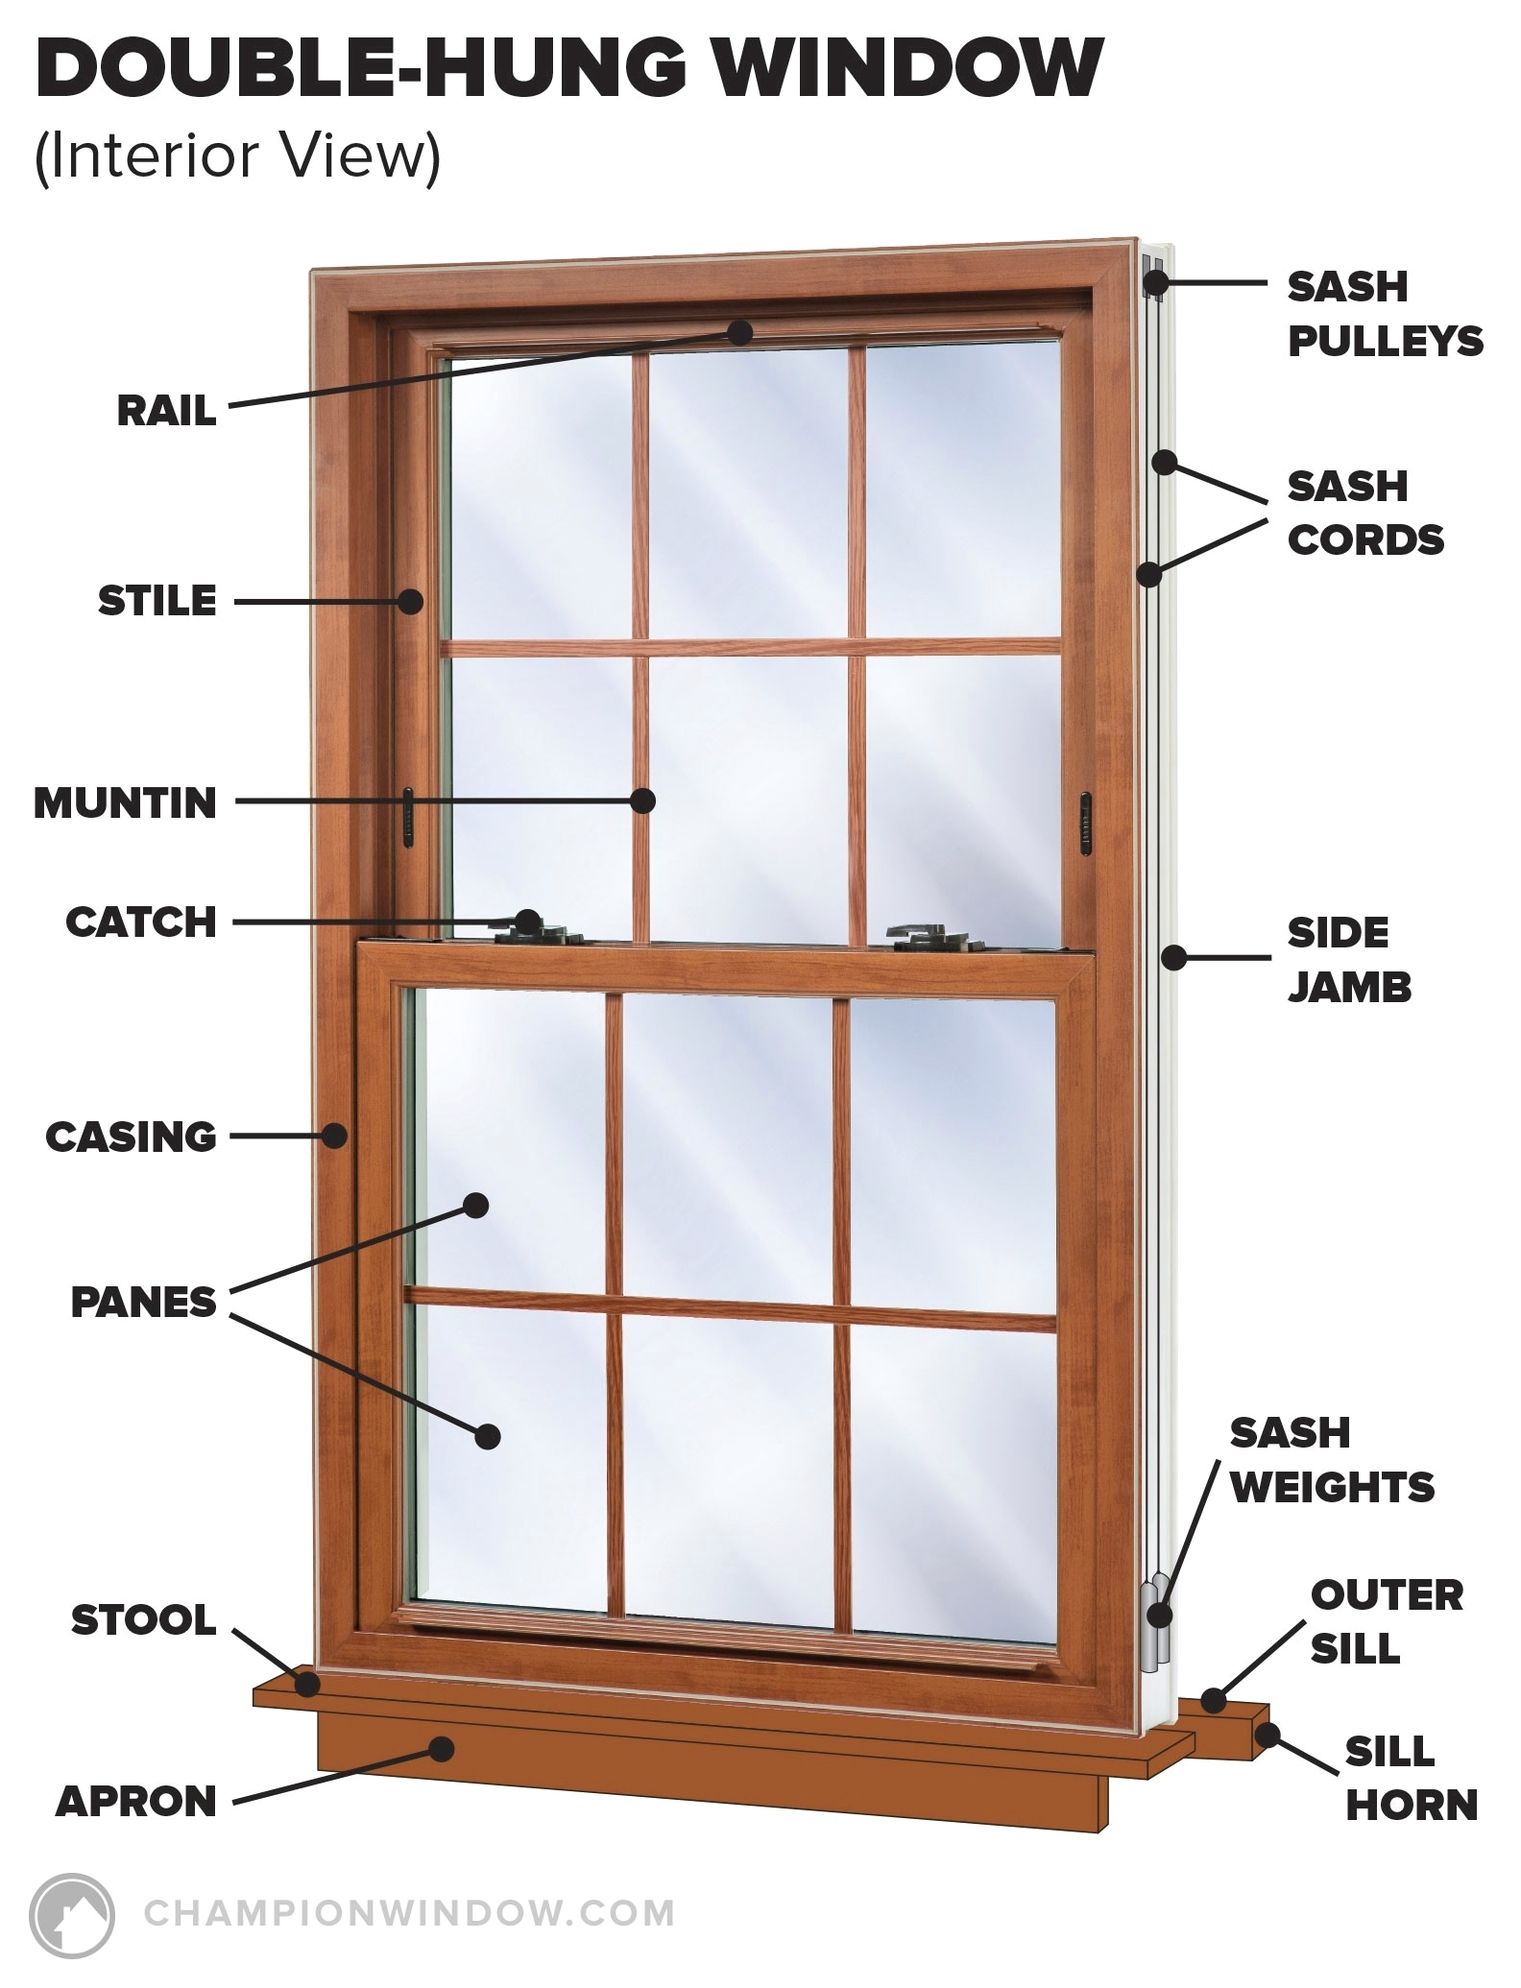 What is a double hung window